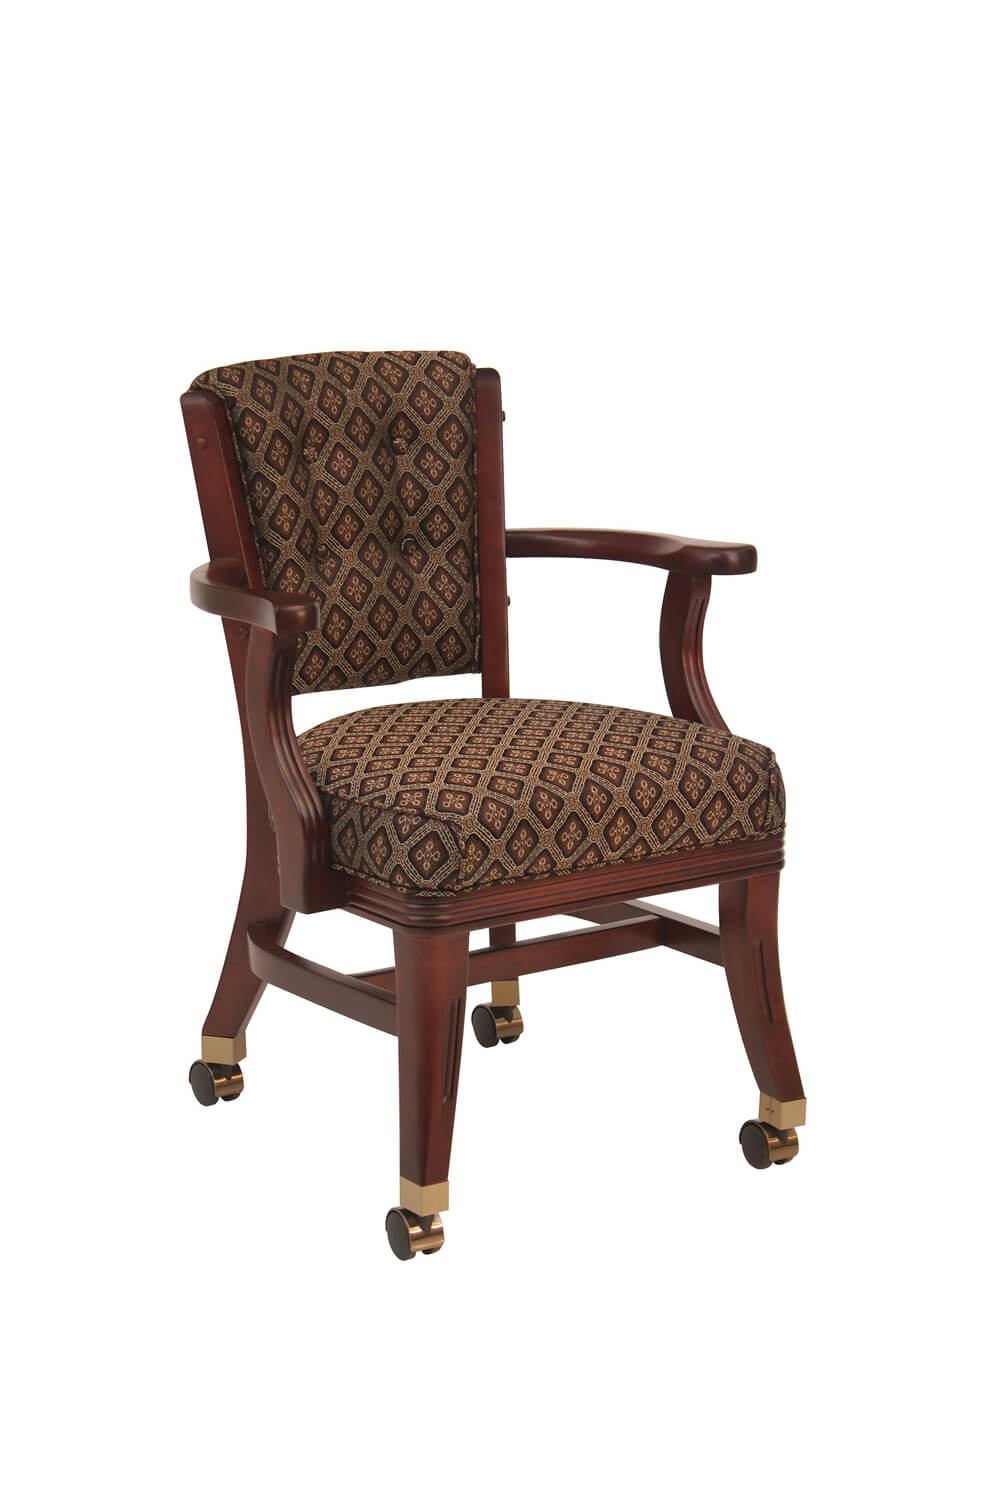 960 Maple Upholstered Club Chair with Arms and Casters